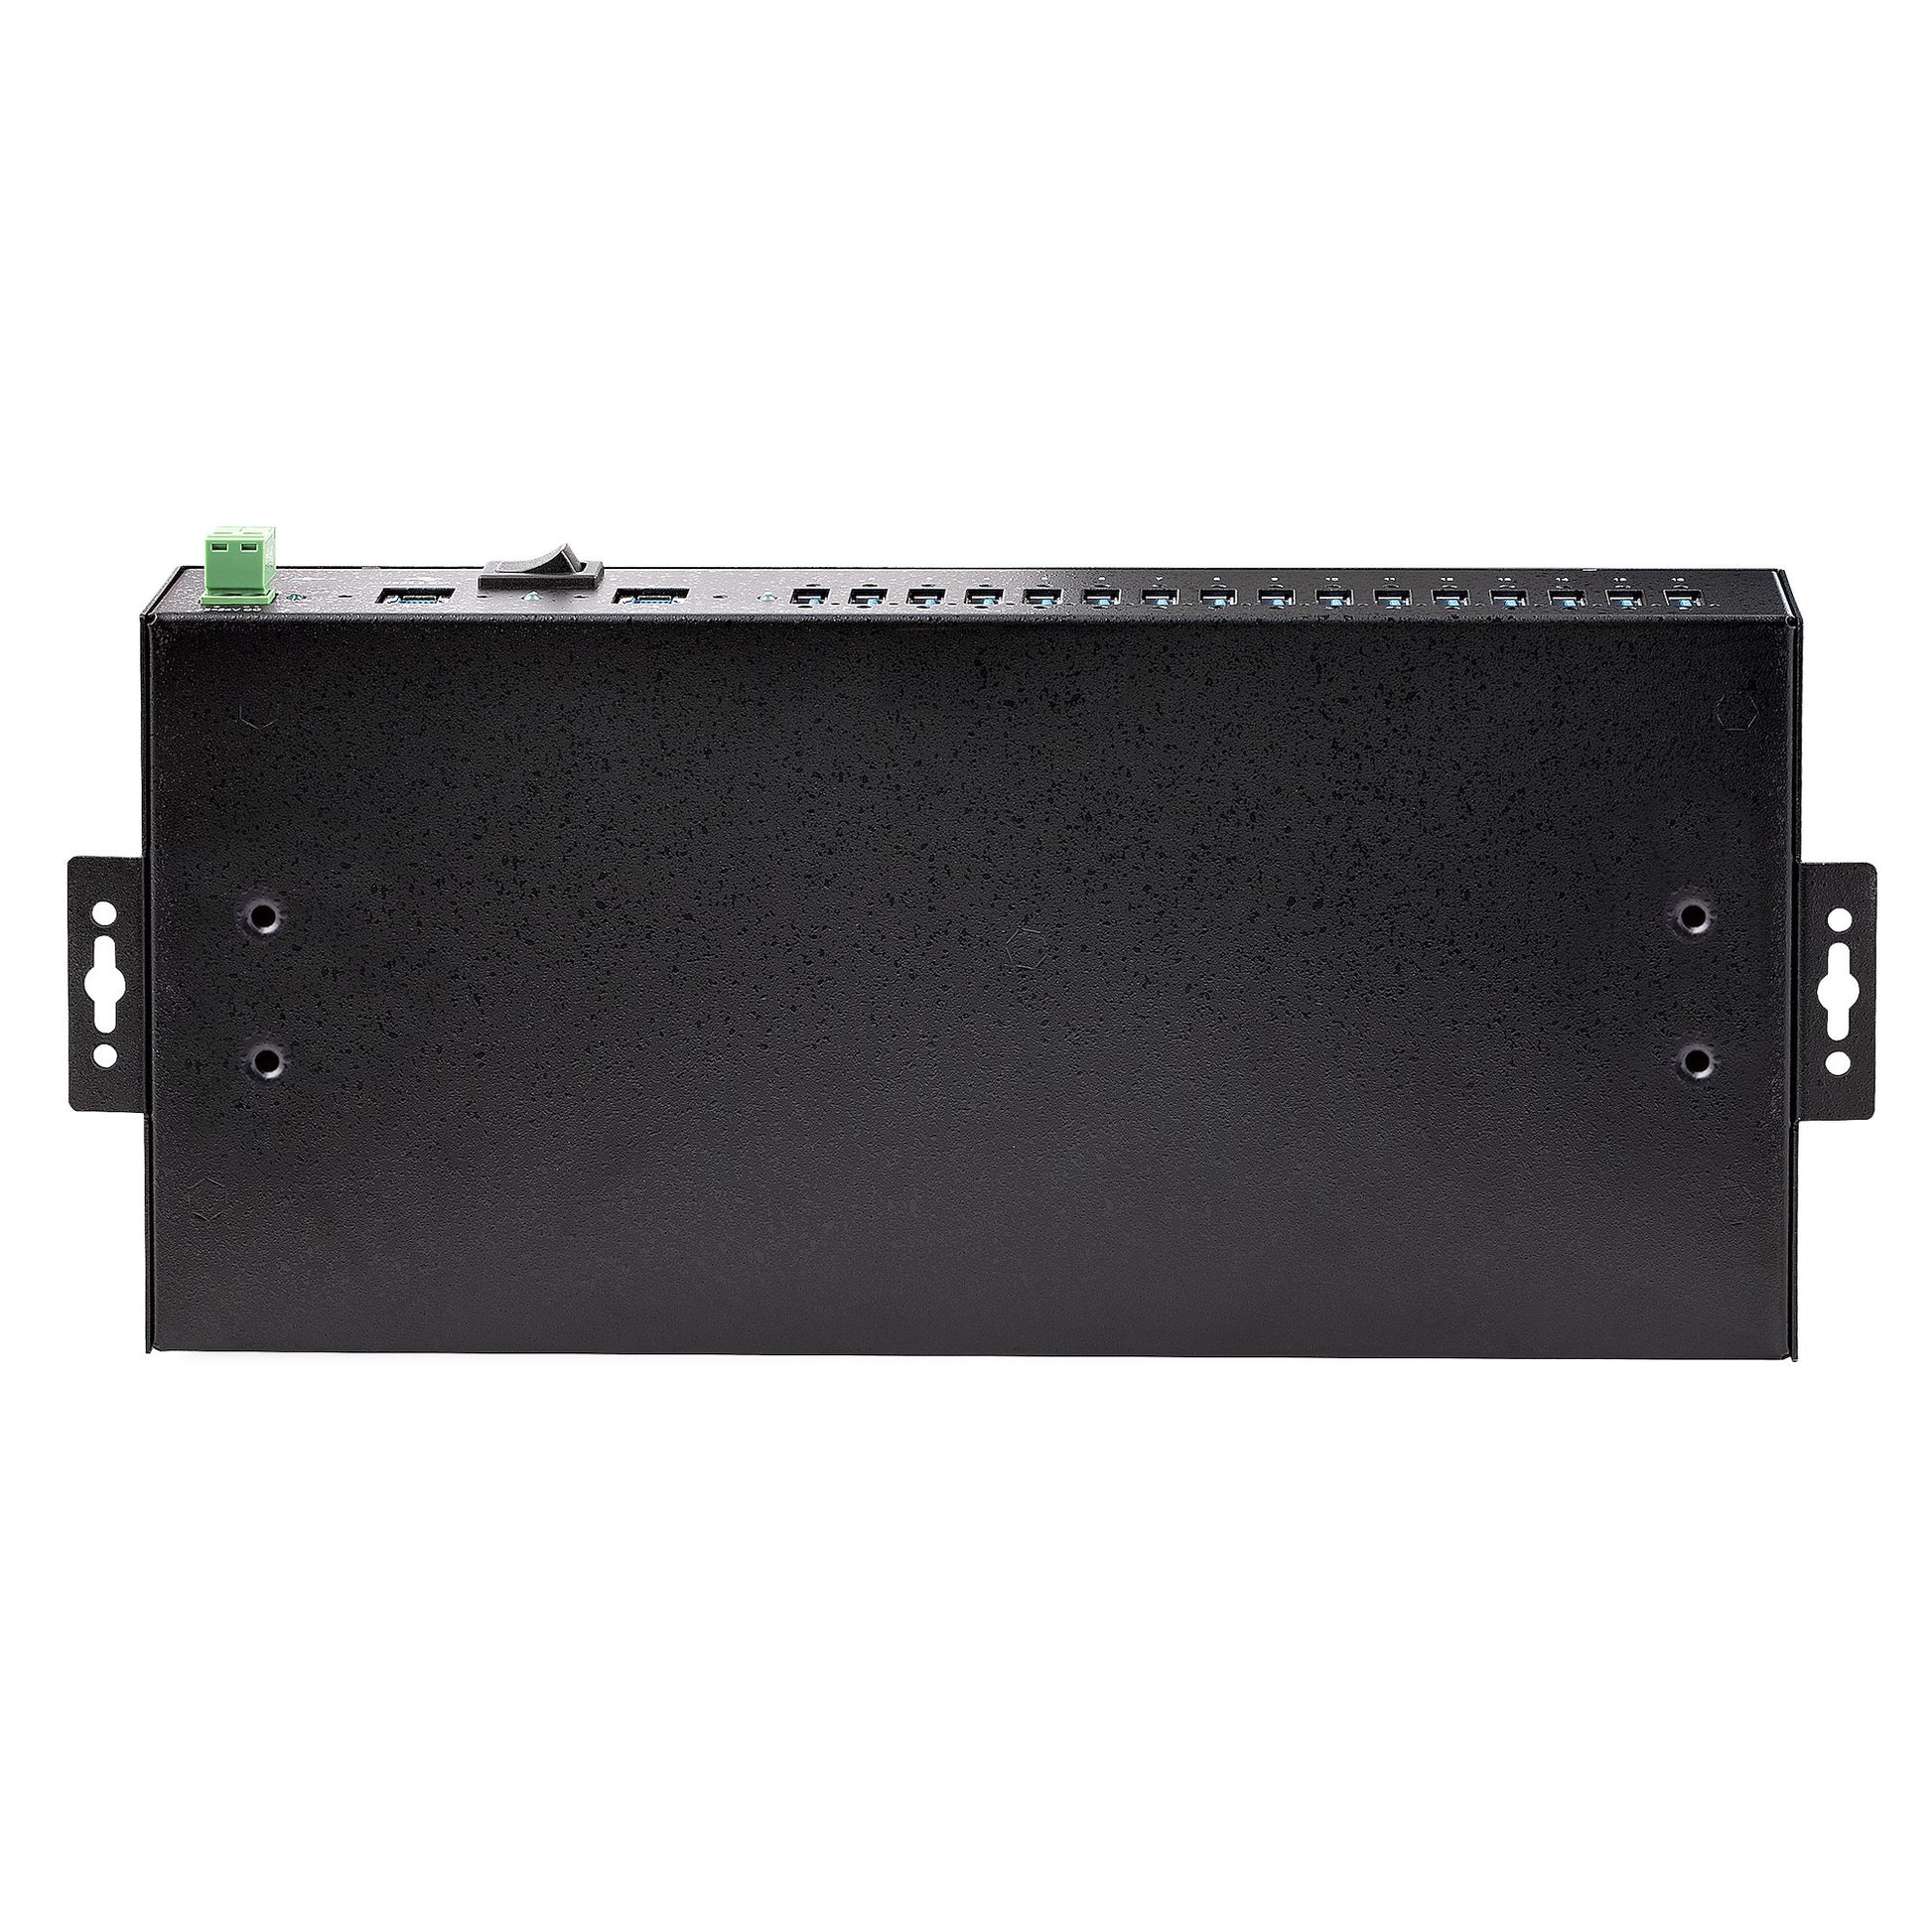 StarTech.com 16-Port Industrial USB 3.0 Hub 5Gbps, Metal, DIN/Surface/Rack Mountable, ESD Protection, Terminal Block Power, up to 120W Shared USB Charging, Dual-Host Hub/Switch-4